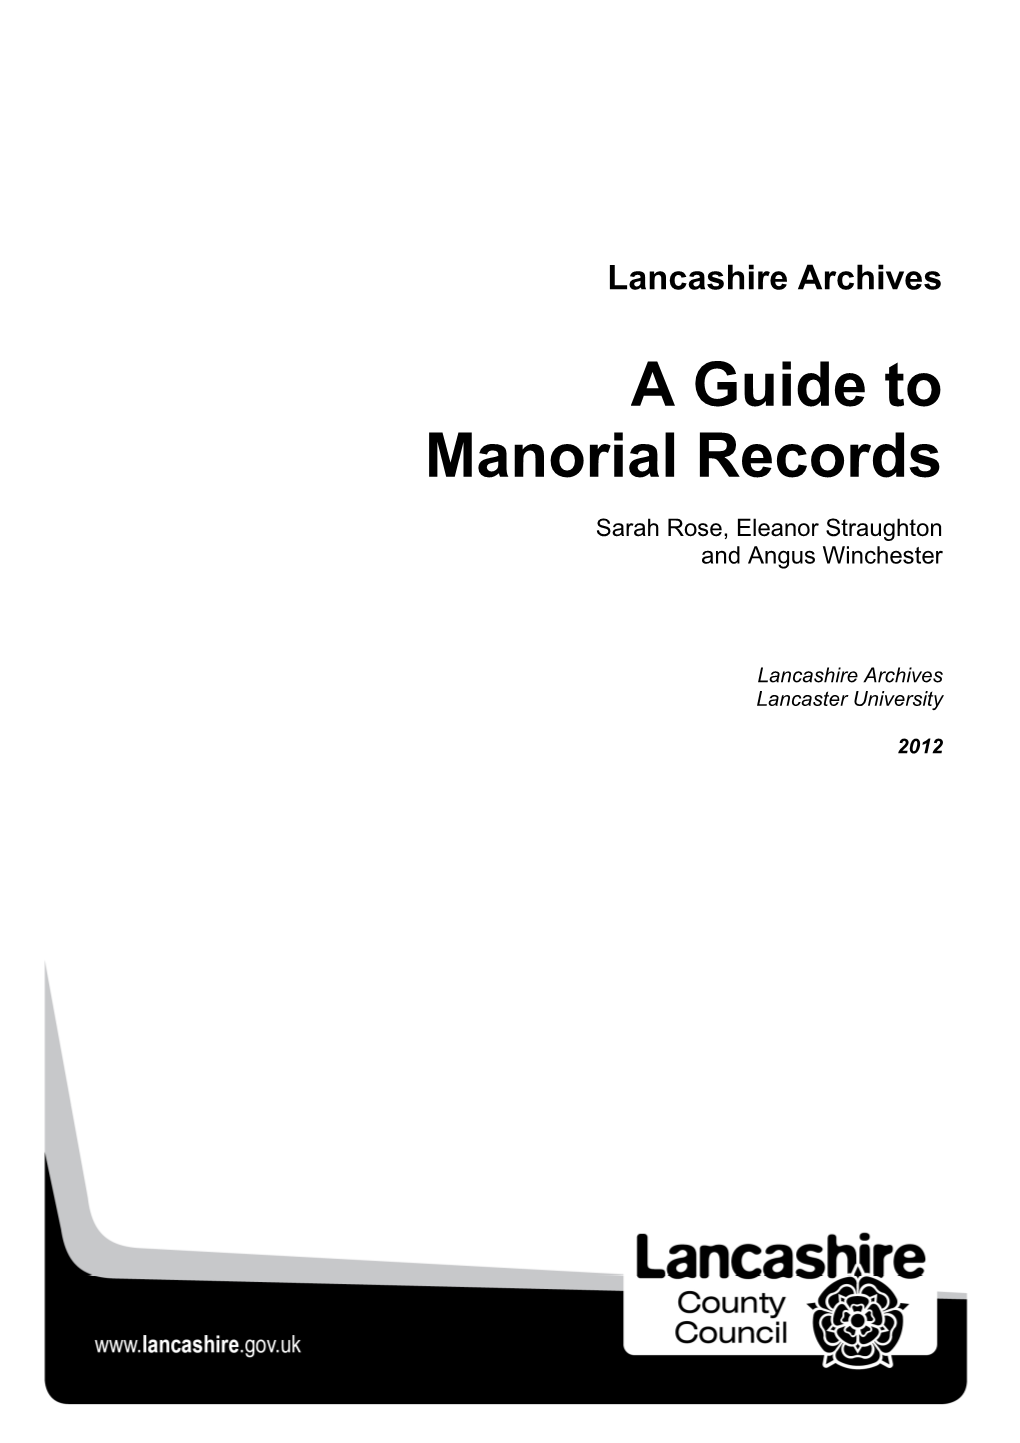 Guide to Lancashire Manorial Records Final